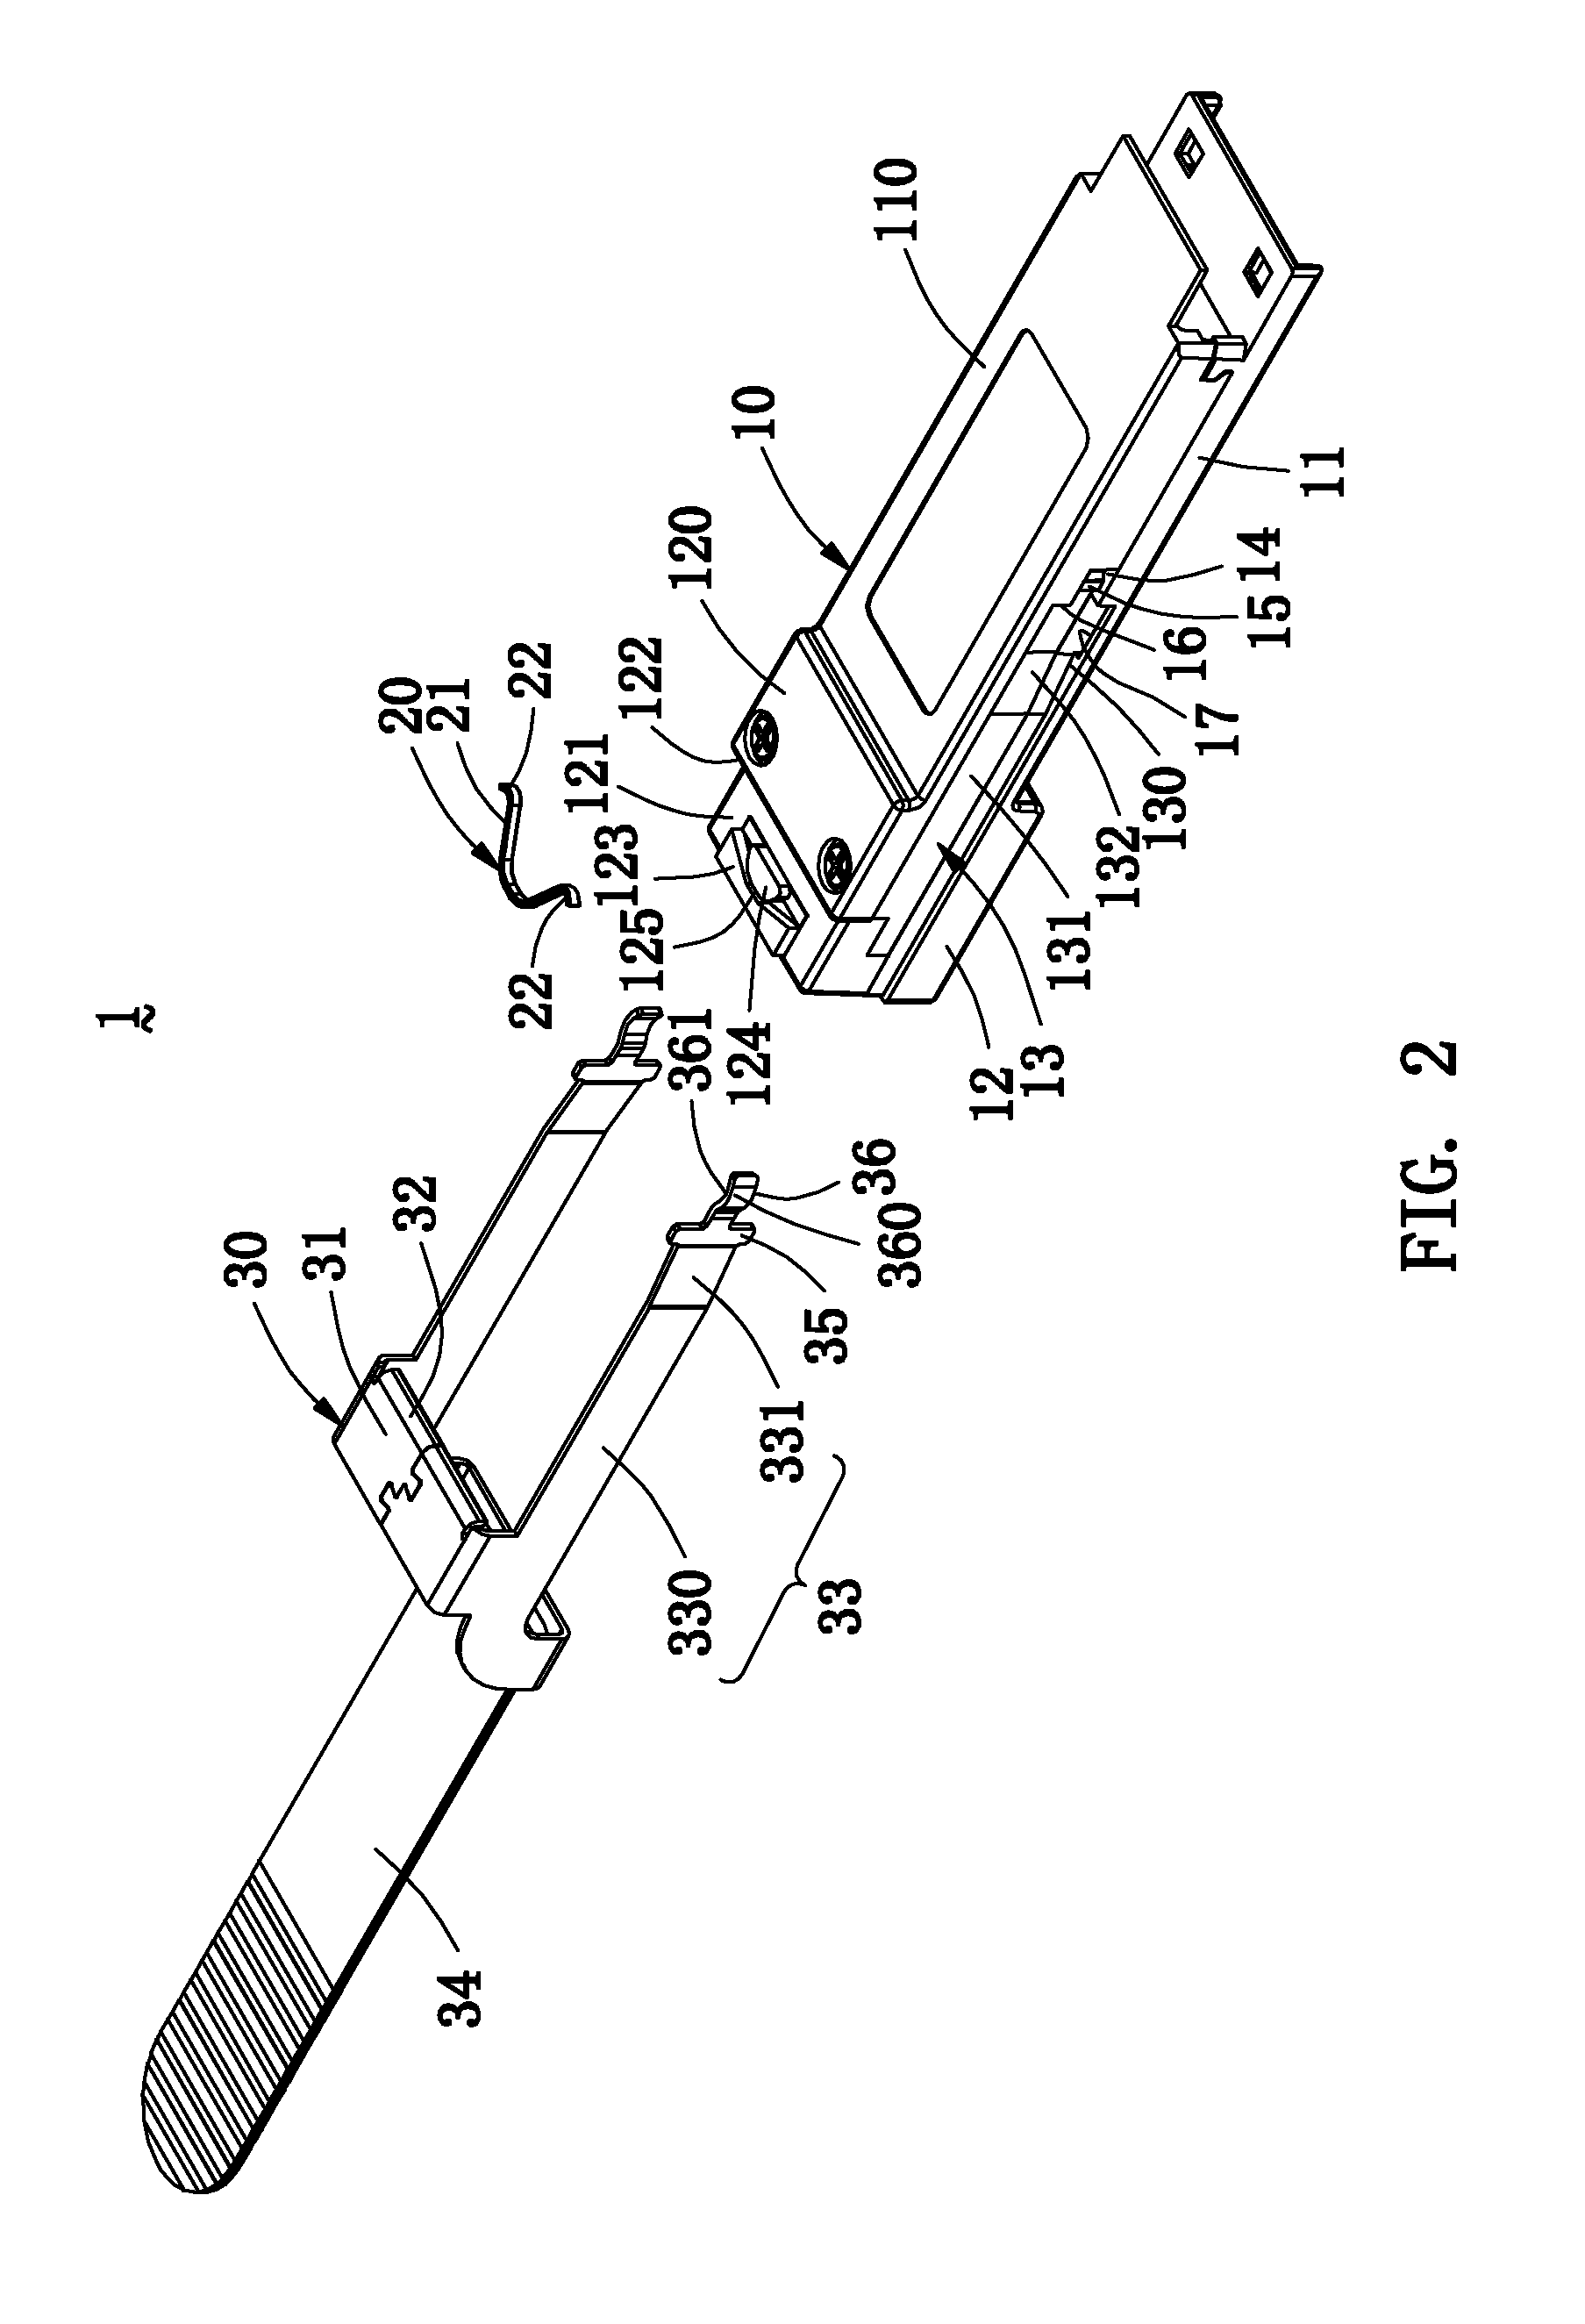 Connector with a Locking and Unlocking Mechanism